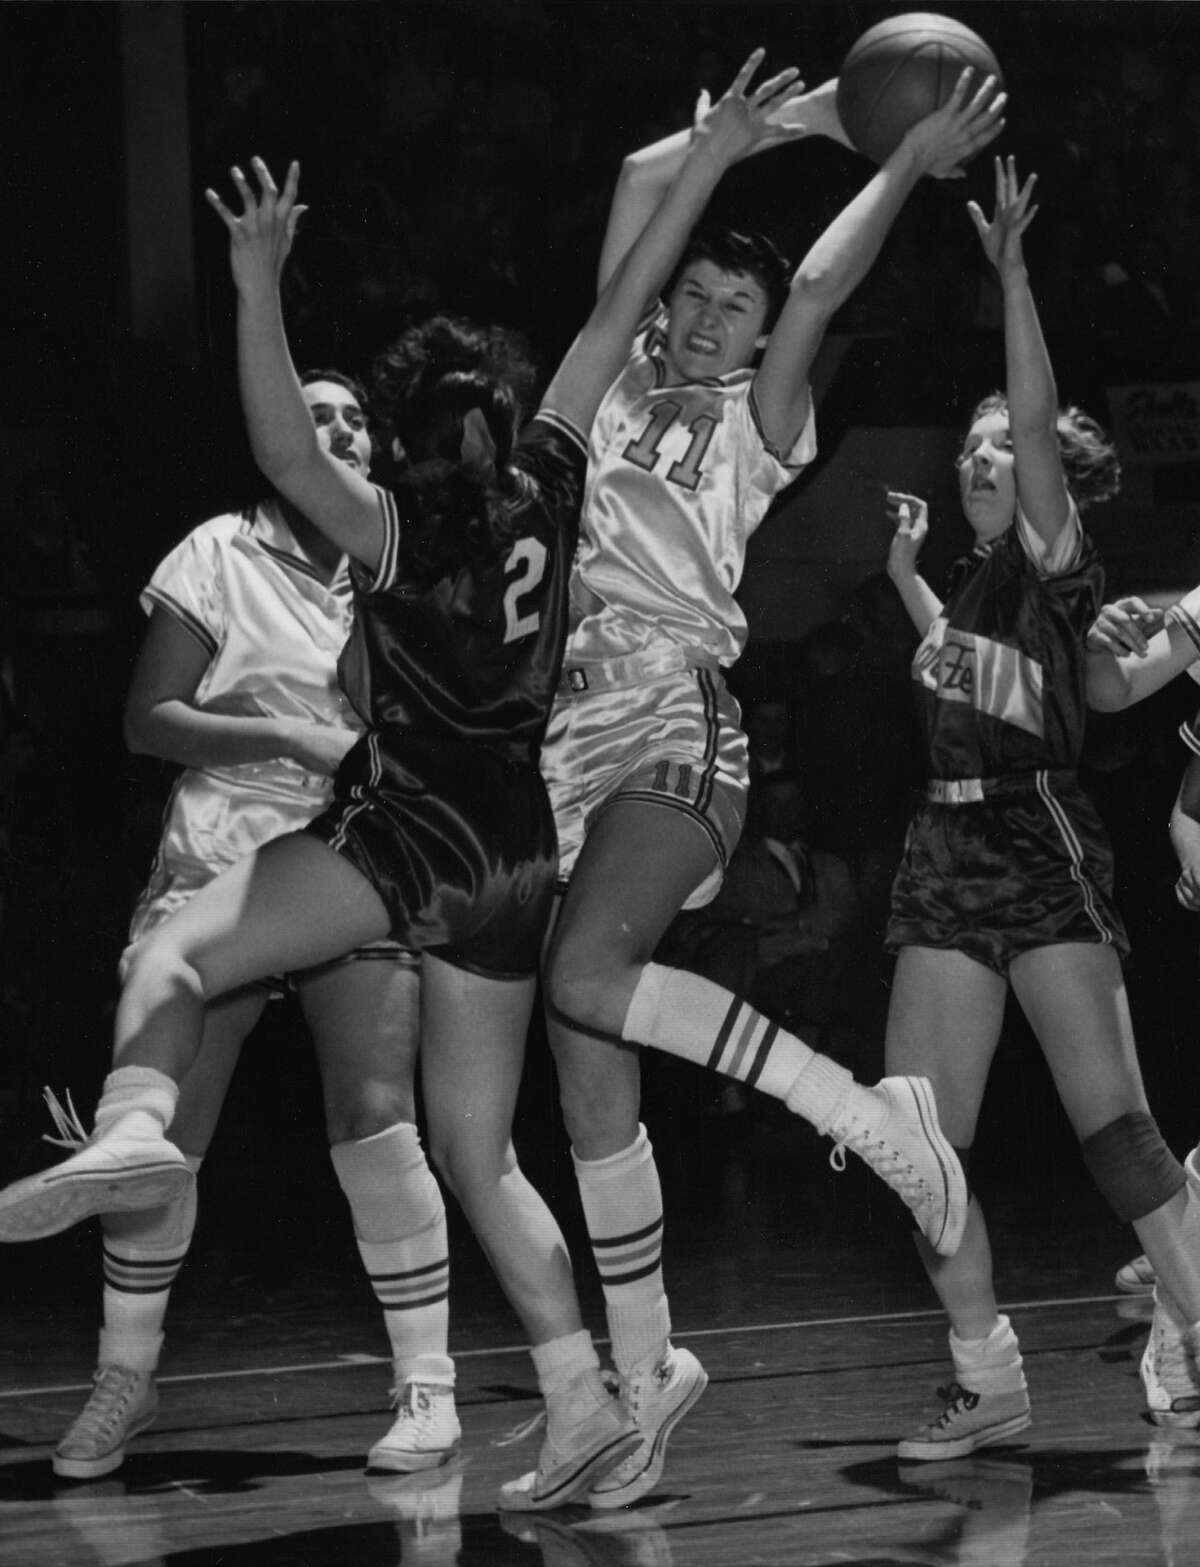 Kaye Garms and the Flying Queens had a lot of success during their time on the court, but had to fight to keep the program’s history alive.